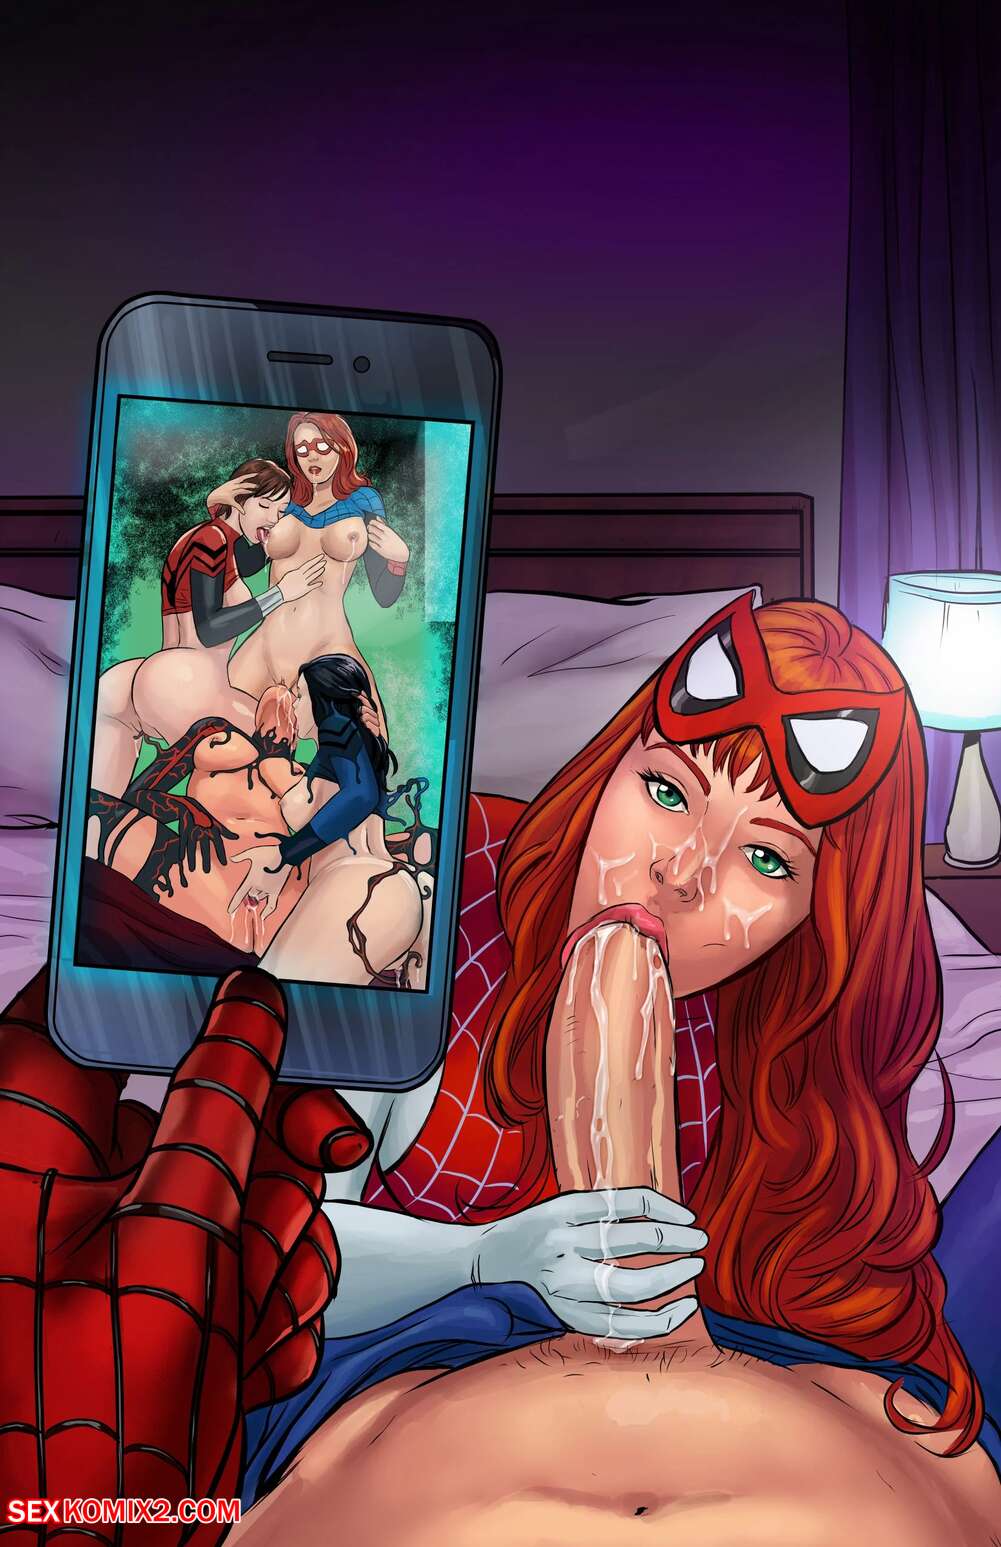 ✅️ Porn comic Scions. Chapter 2. SpiderMan. Tracy Scops. Sex comic busty  brunette beauty | Porn comics in English for adults only | sexkomix2.com